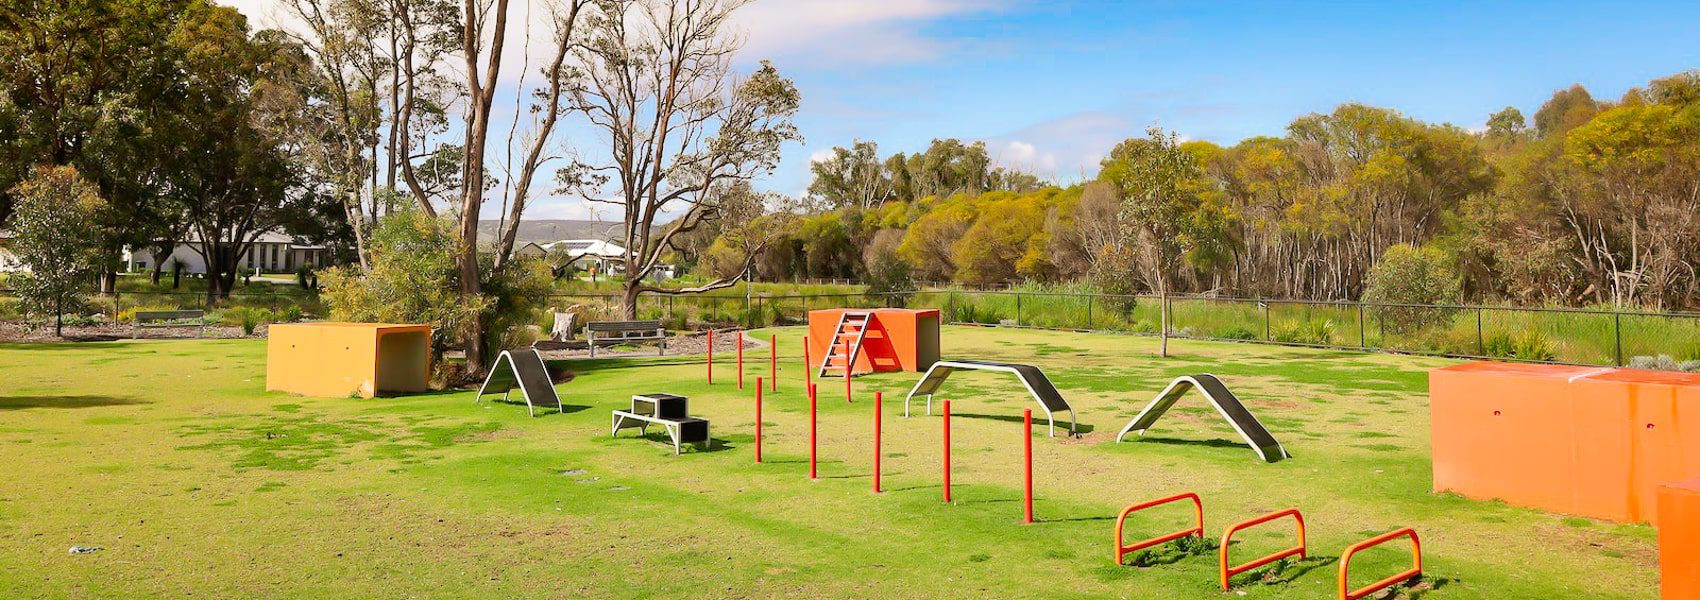 Annie's Landing Dog Park is located in Ellenbrook in Perth's north